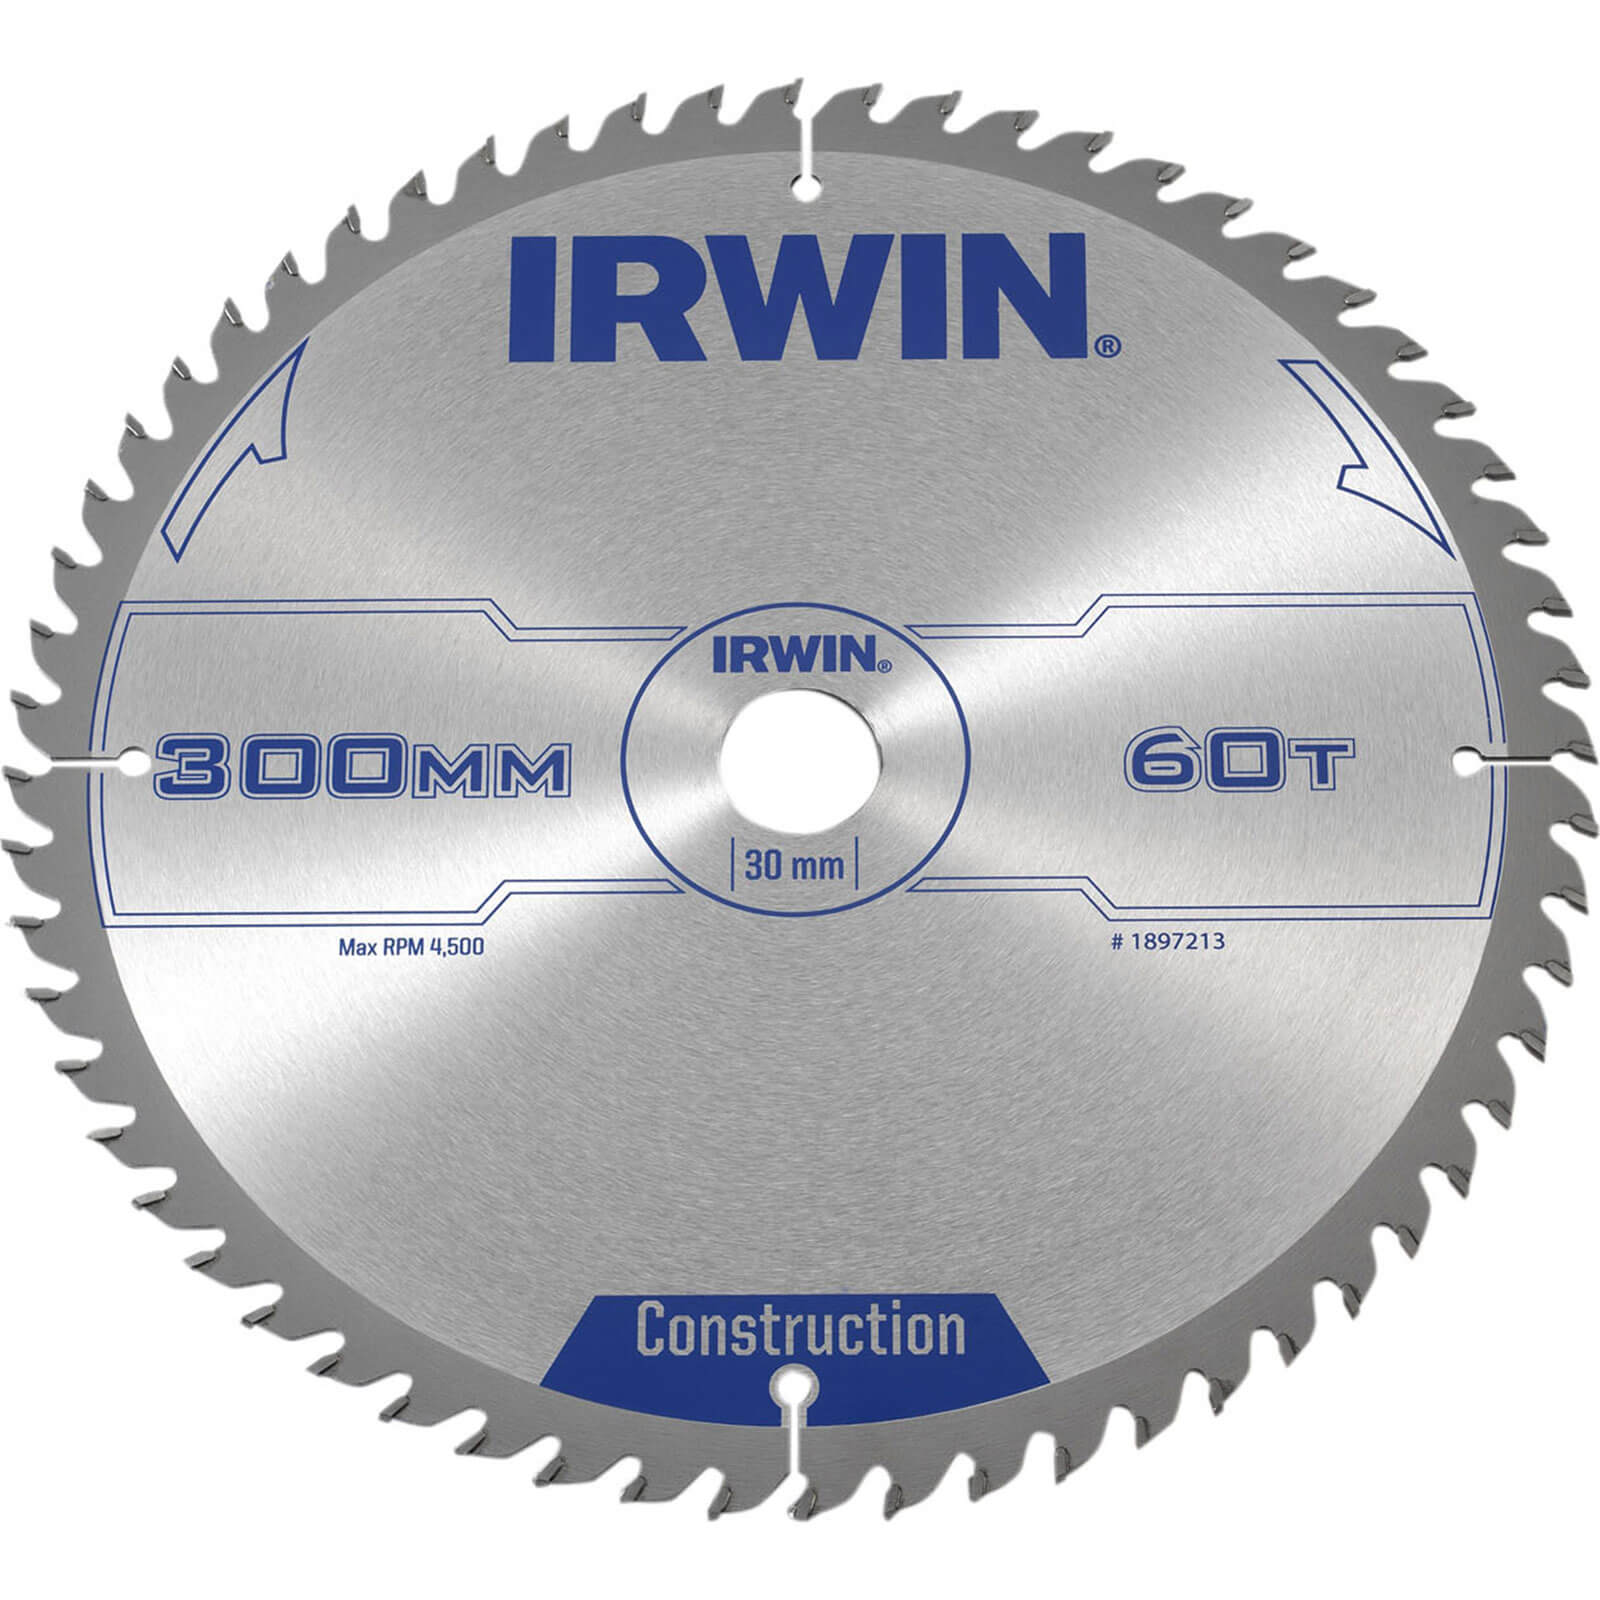 Image of Irwin ATB Construction Circular Saw Blade 300mm 60T 30mm